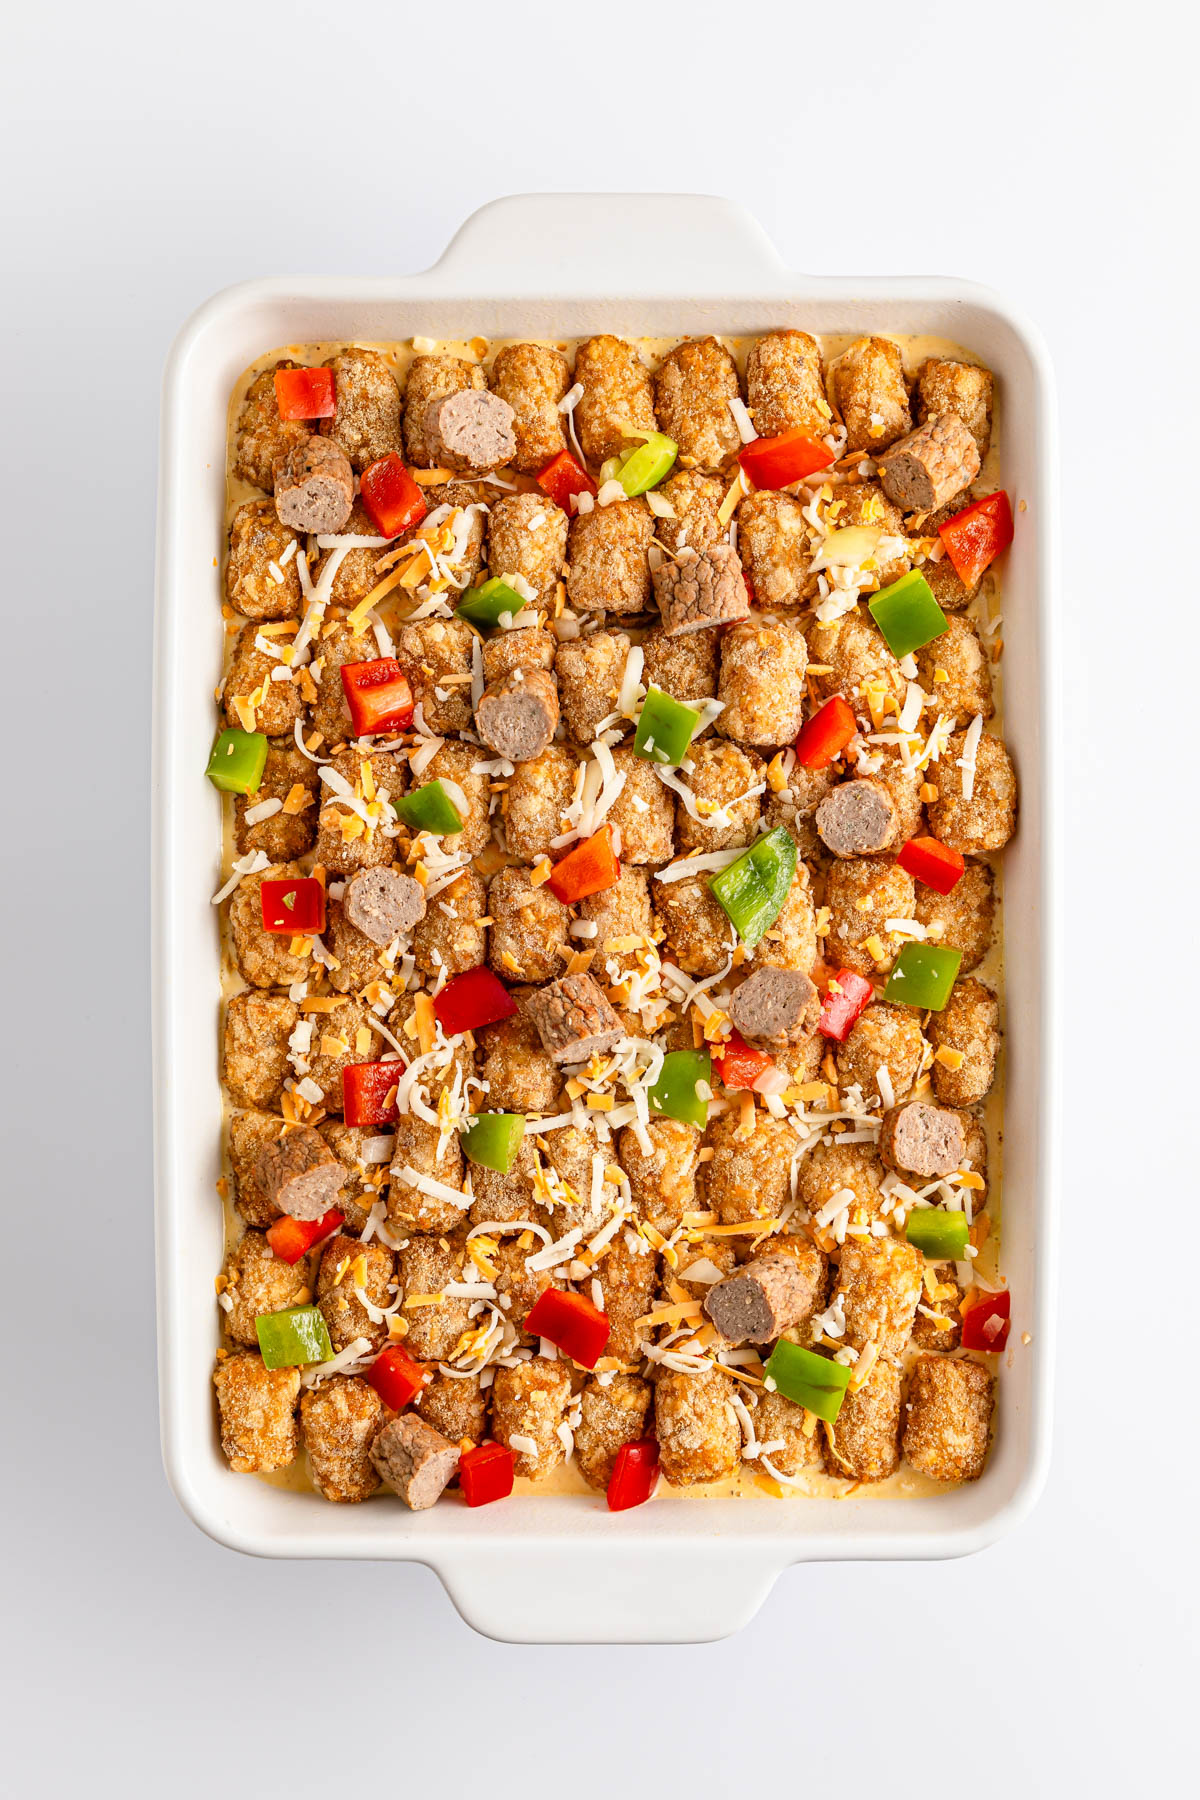 A casserole dish filled with seasoned tofu, bell peppers, and shredded cheese.